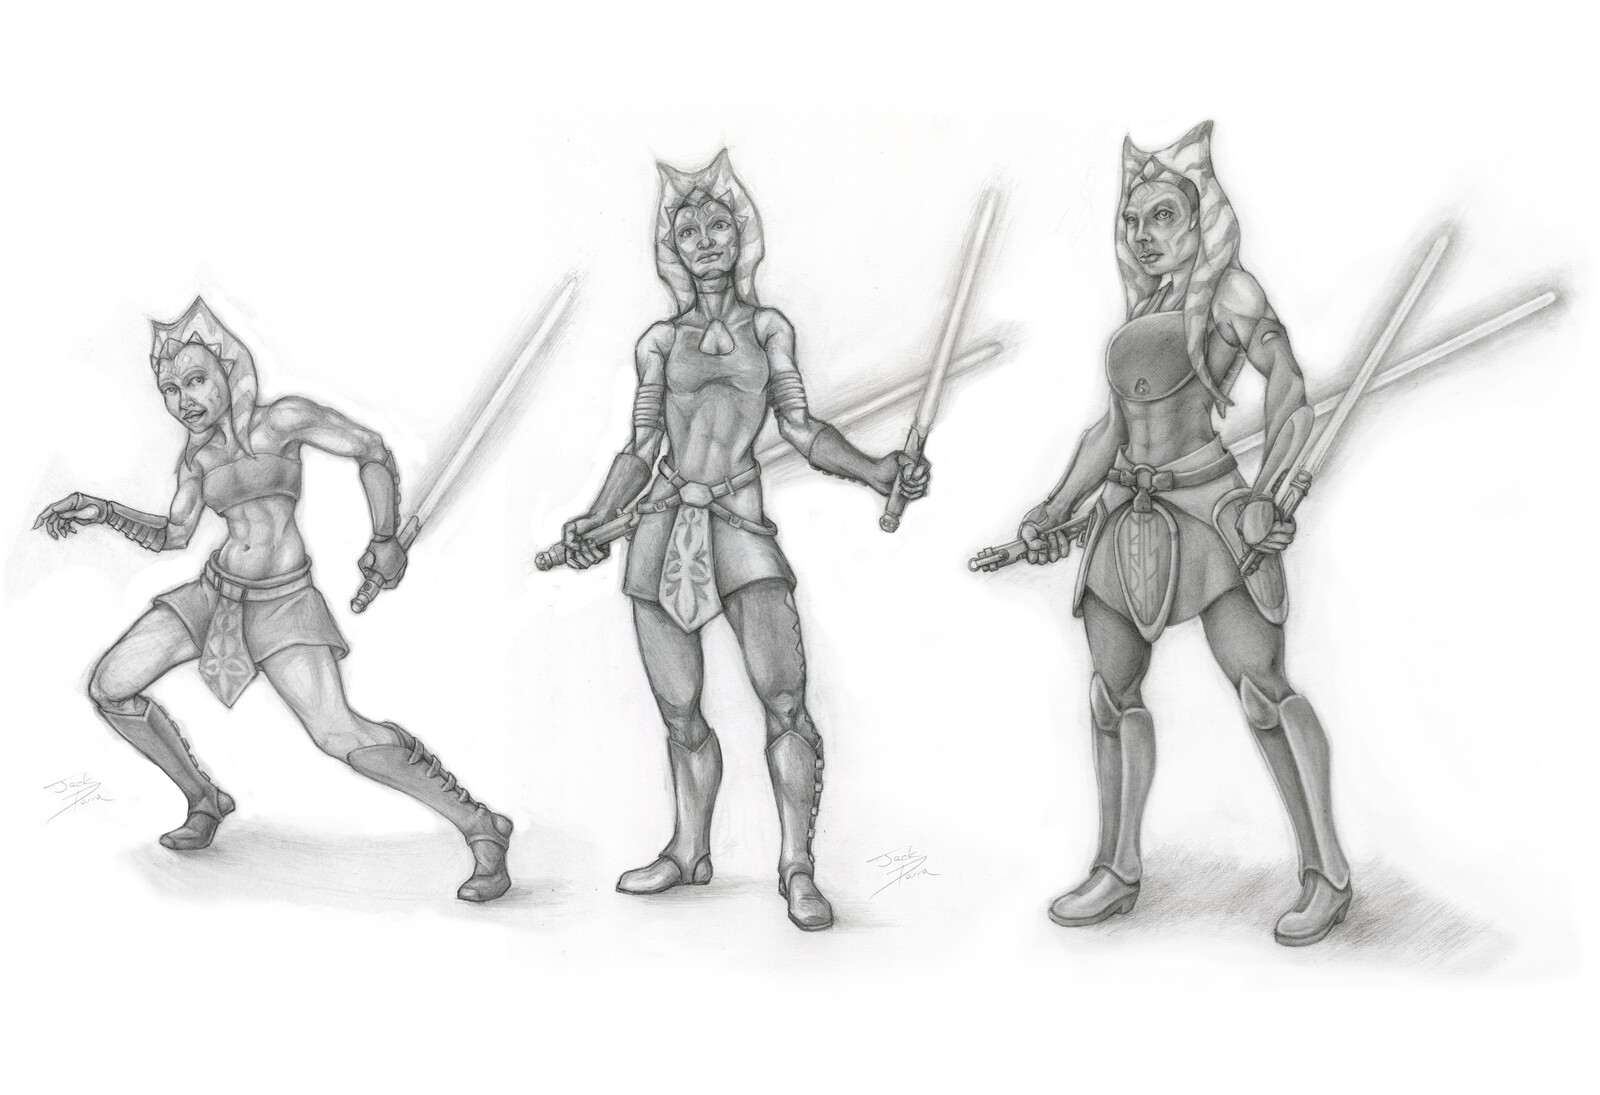 Ashoka Tryptic

3 ages of Ashoka from the cartoons. 

(Likely do the Mandalorian version at some point, just find the costume a bit bland currently. Hopefully it gets better when she gets her own series.)